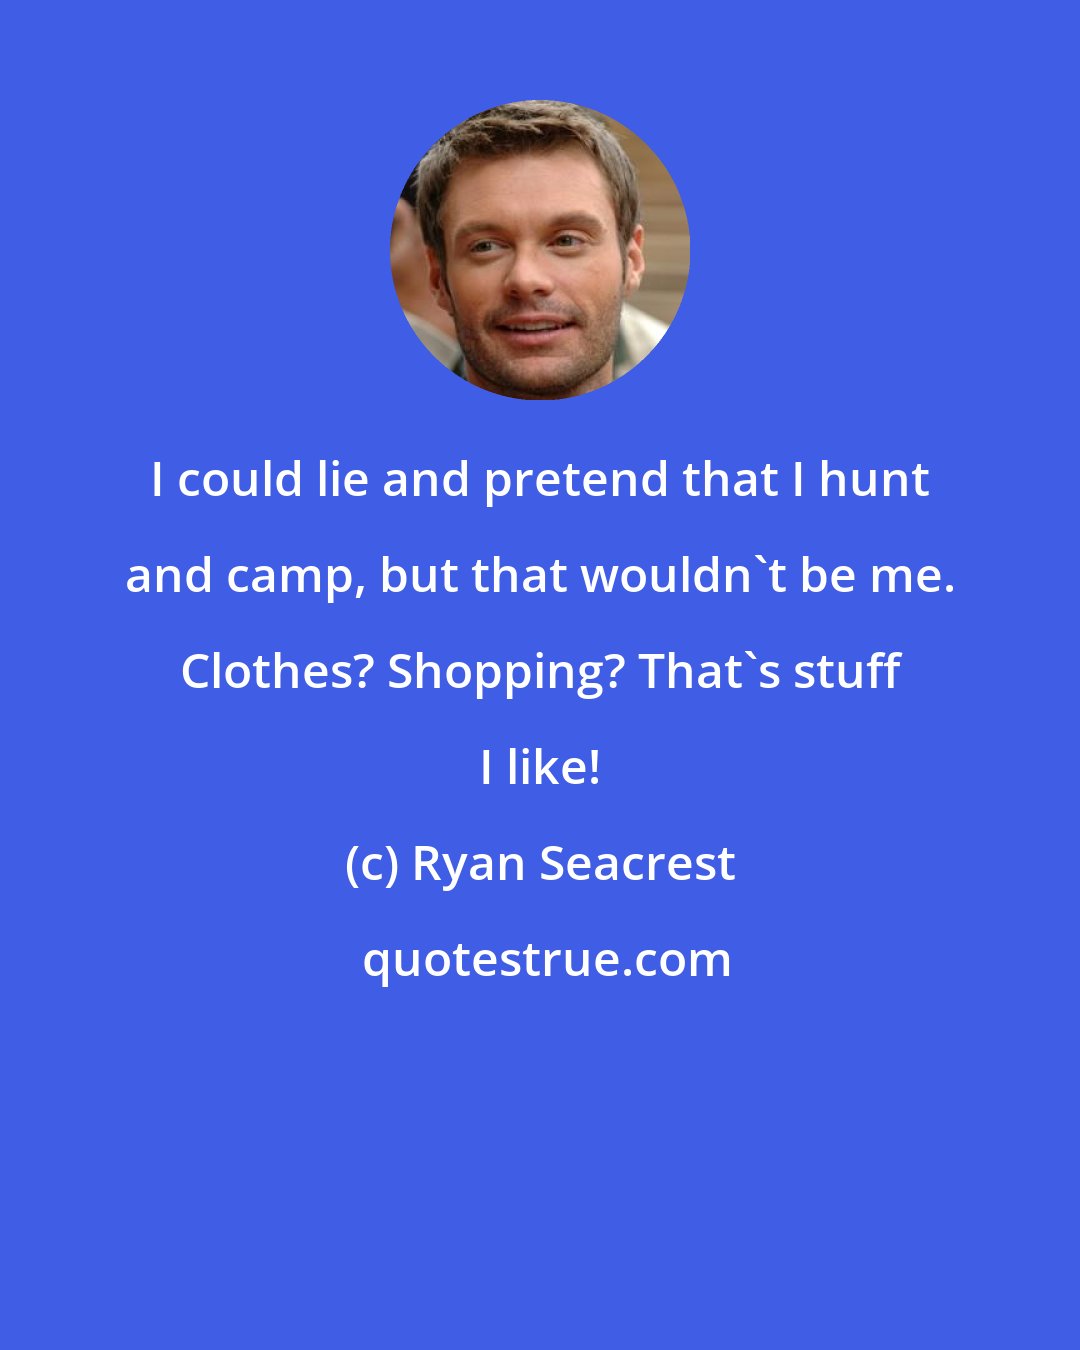 Ryan Seacrest: I could lie and pretend that I hunt and camp, but that wouldn't be me. Clothes? Shopping? That's stuff I like!